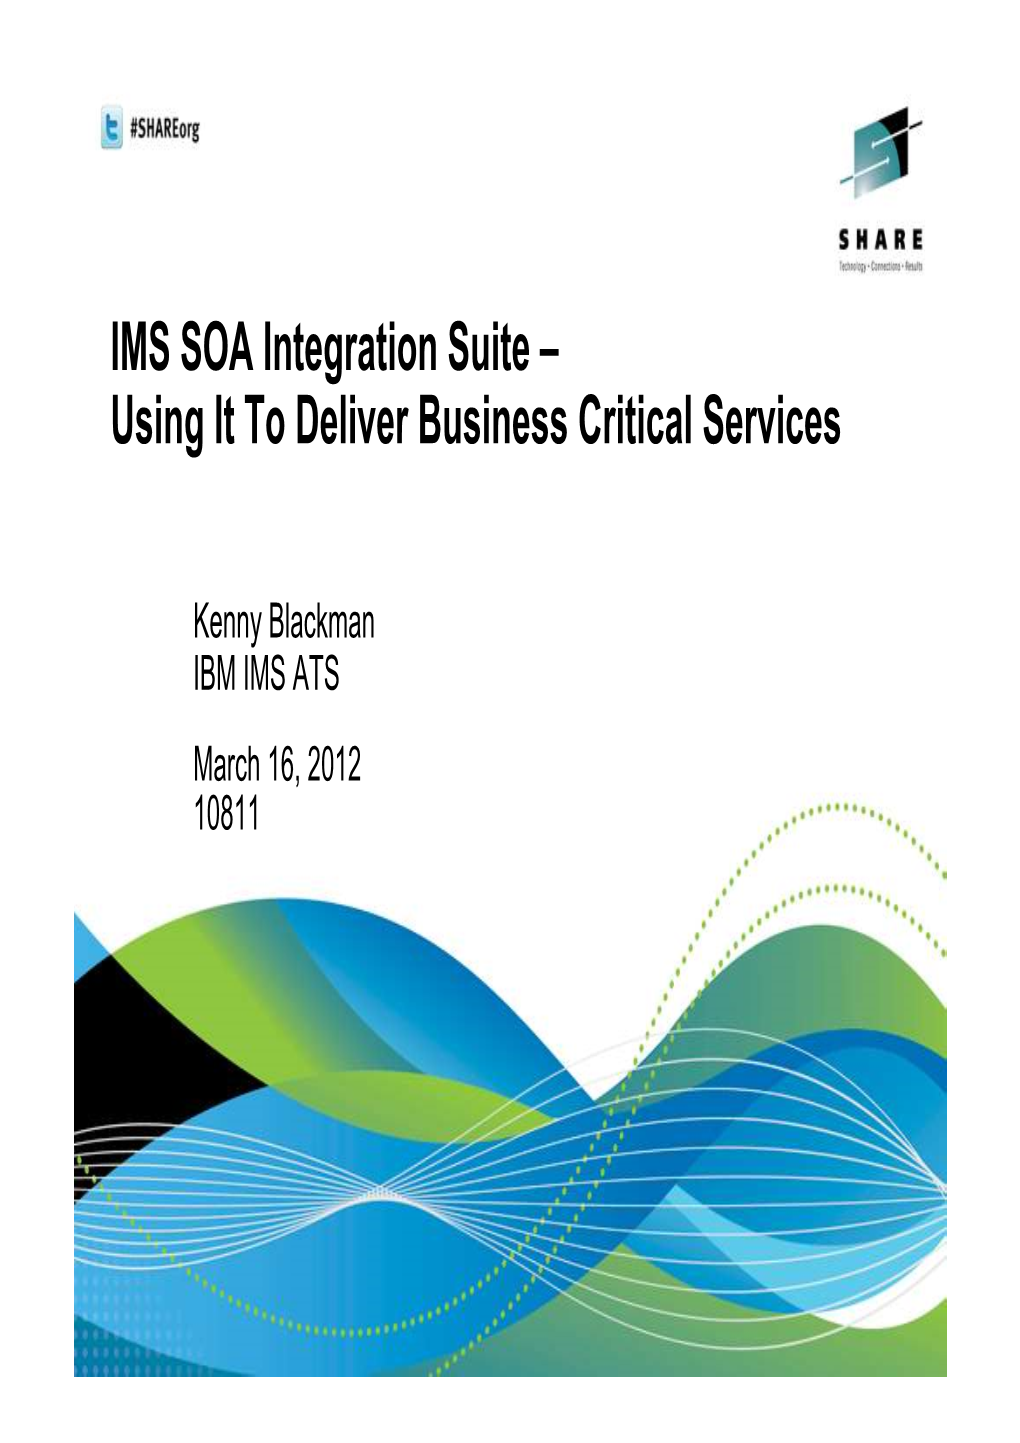 IMS SOA Integration Suite – Using It to Deliver Business Critical Services